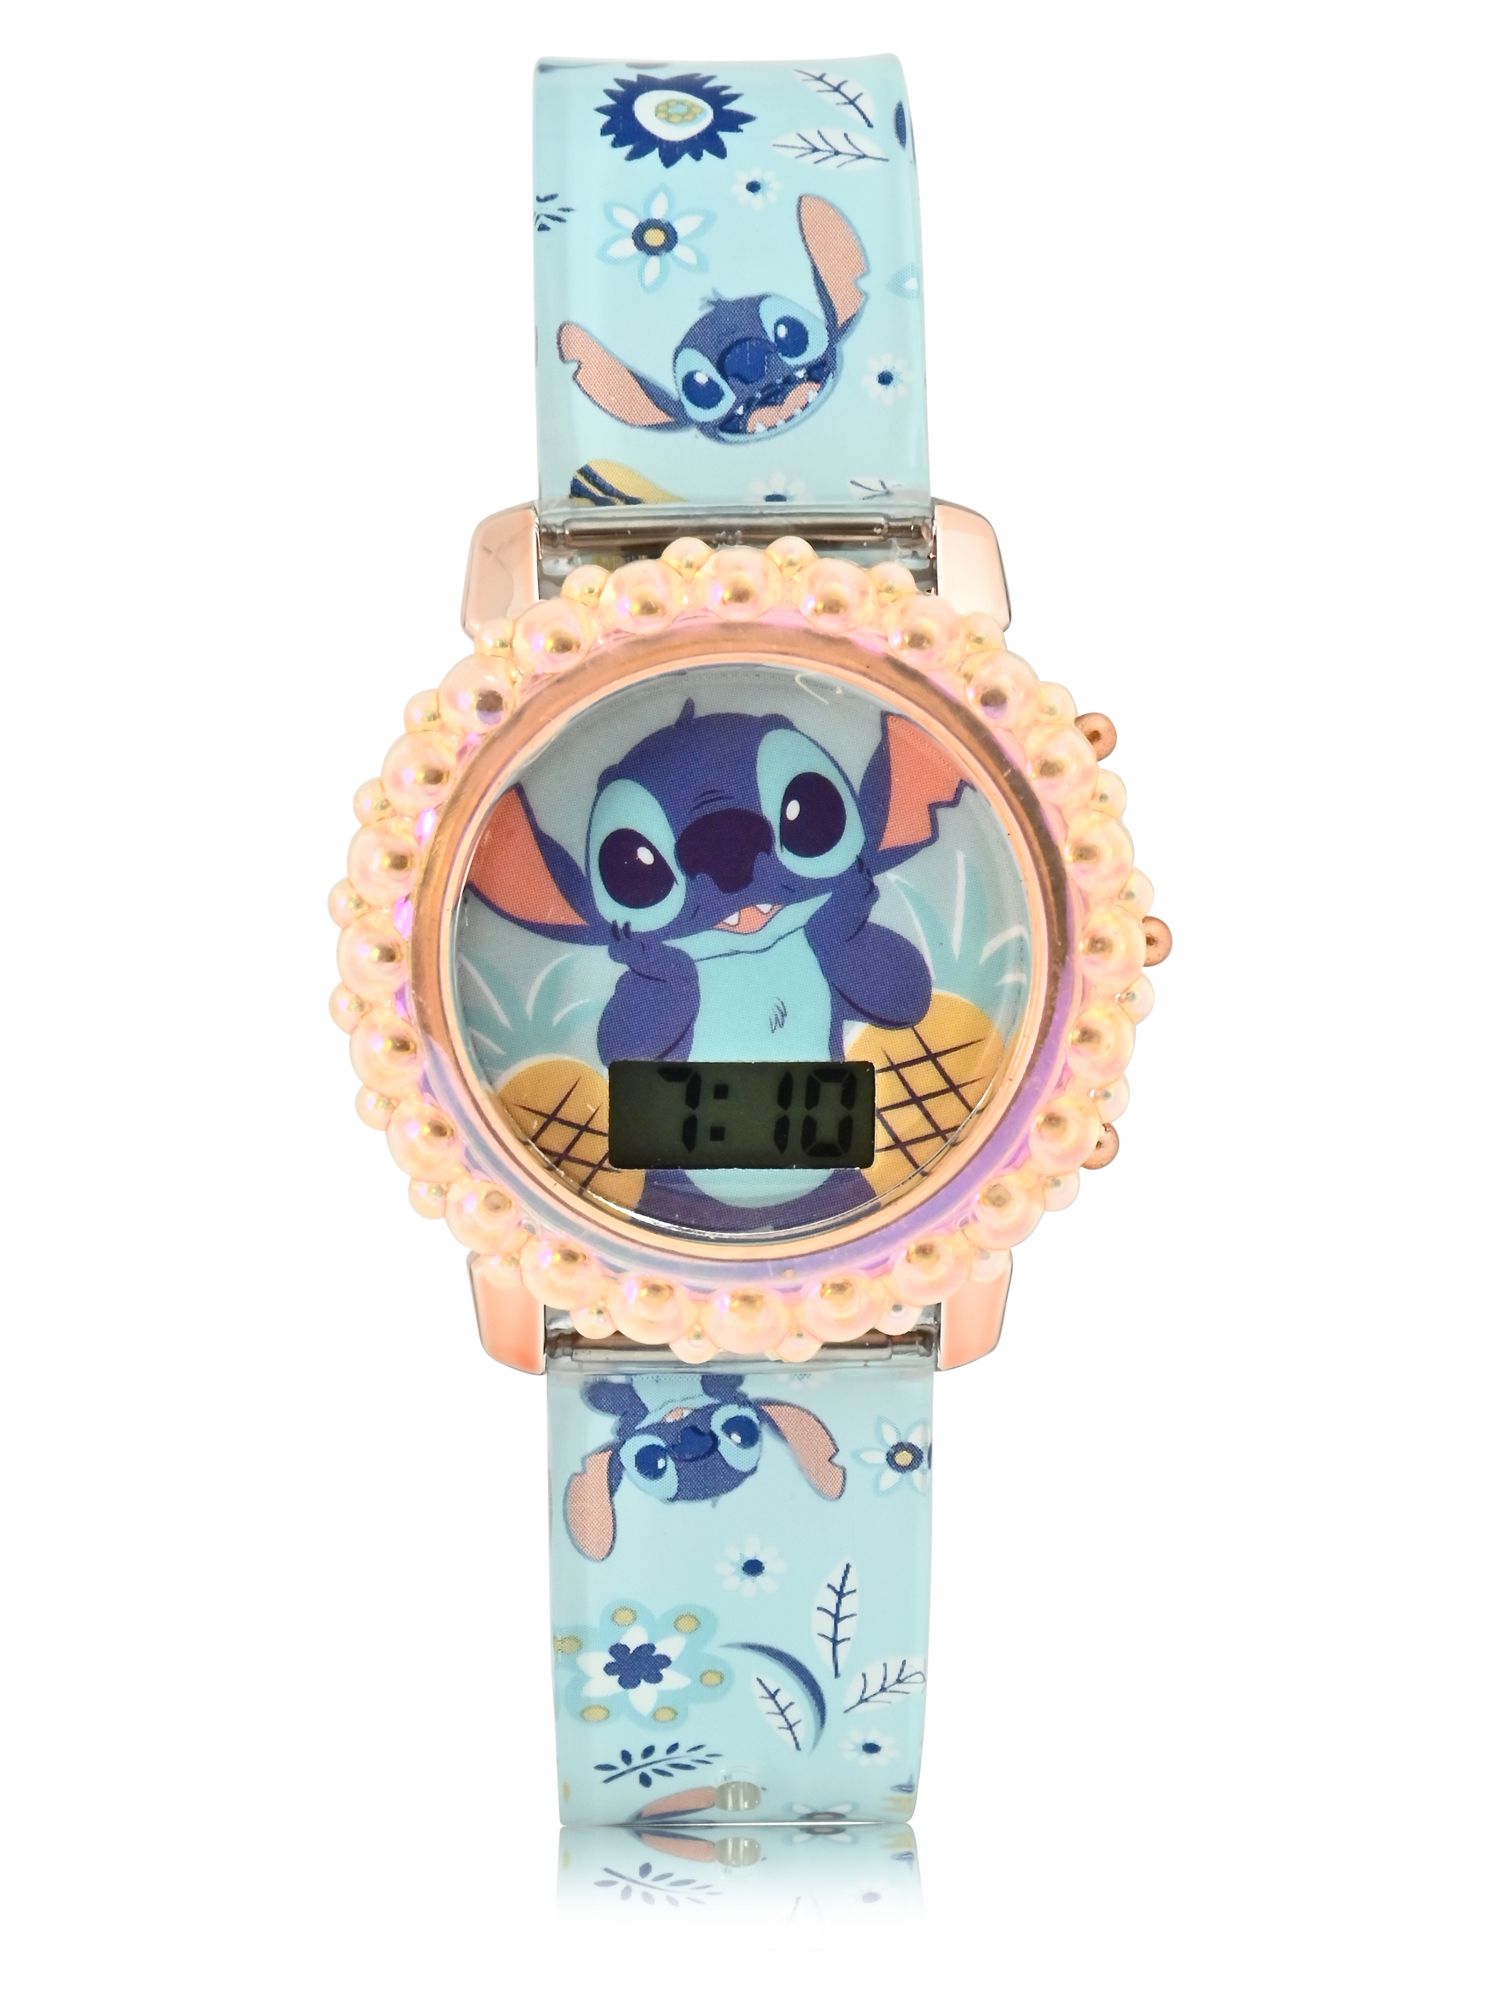 LAS4079WM Stitch Kids Molded Case Flashing Lights LCD Watch with Printed Strap - image 3 of 3